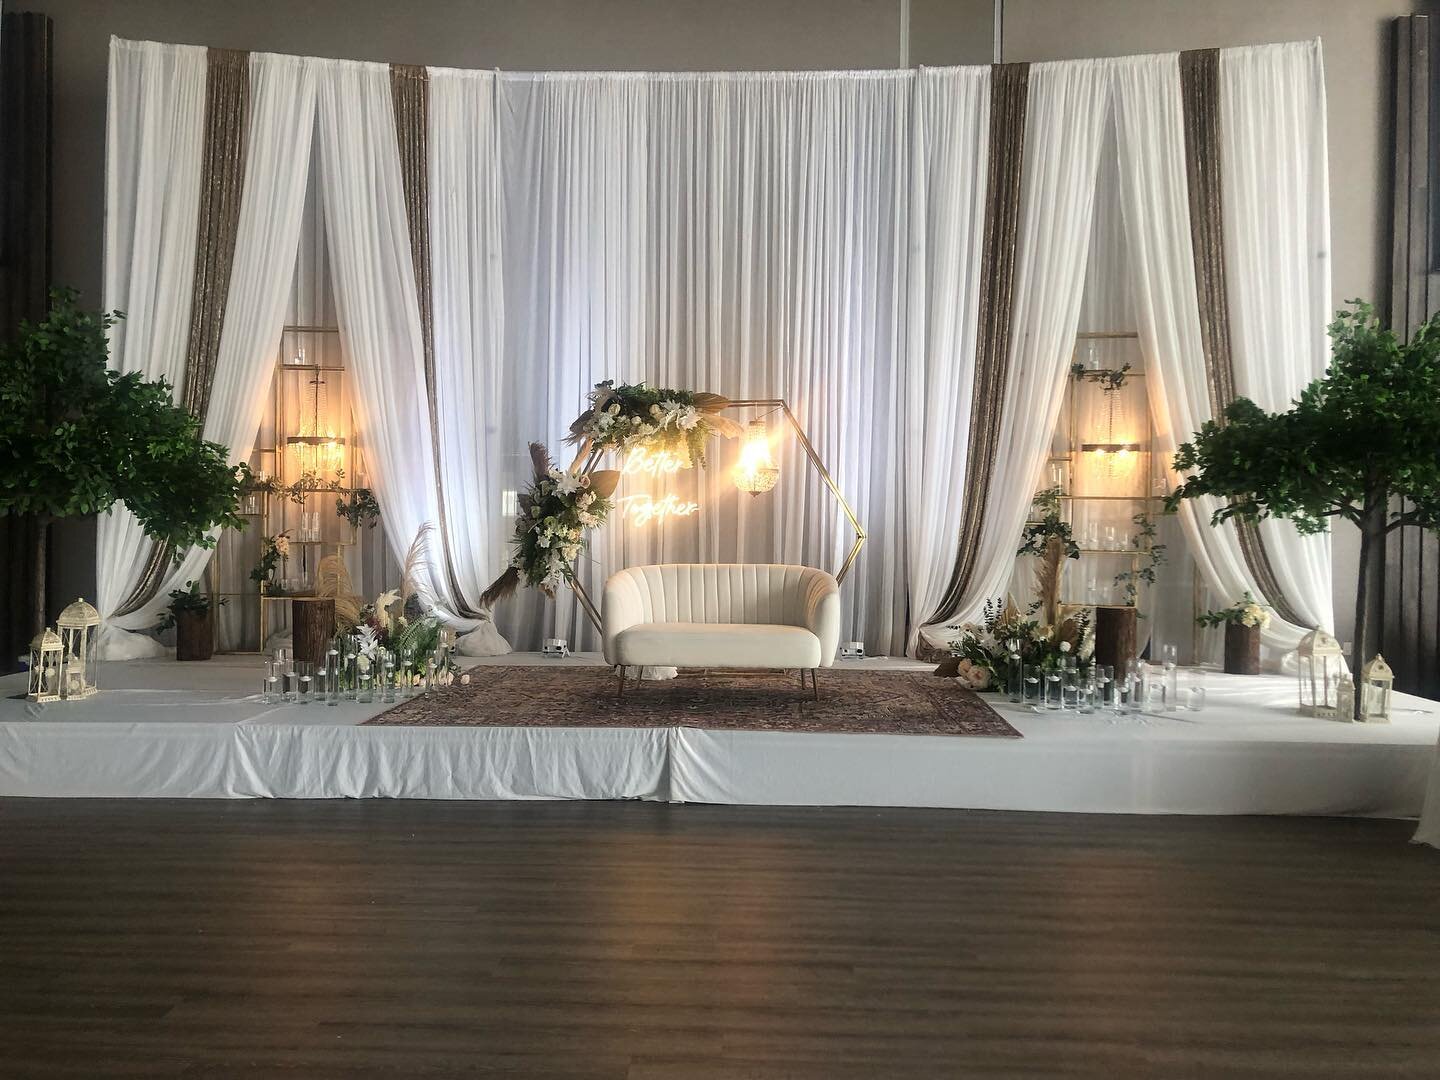 Keeping it Vintage &amp; Classy. Book your Reception quick, limited dates available for 2021 &amp; 2022. Call our Professional Sales Team at 416-814-3600. We look forward to hosting your Special Event.